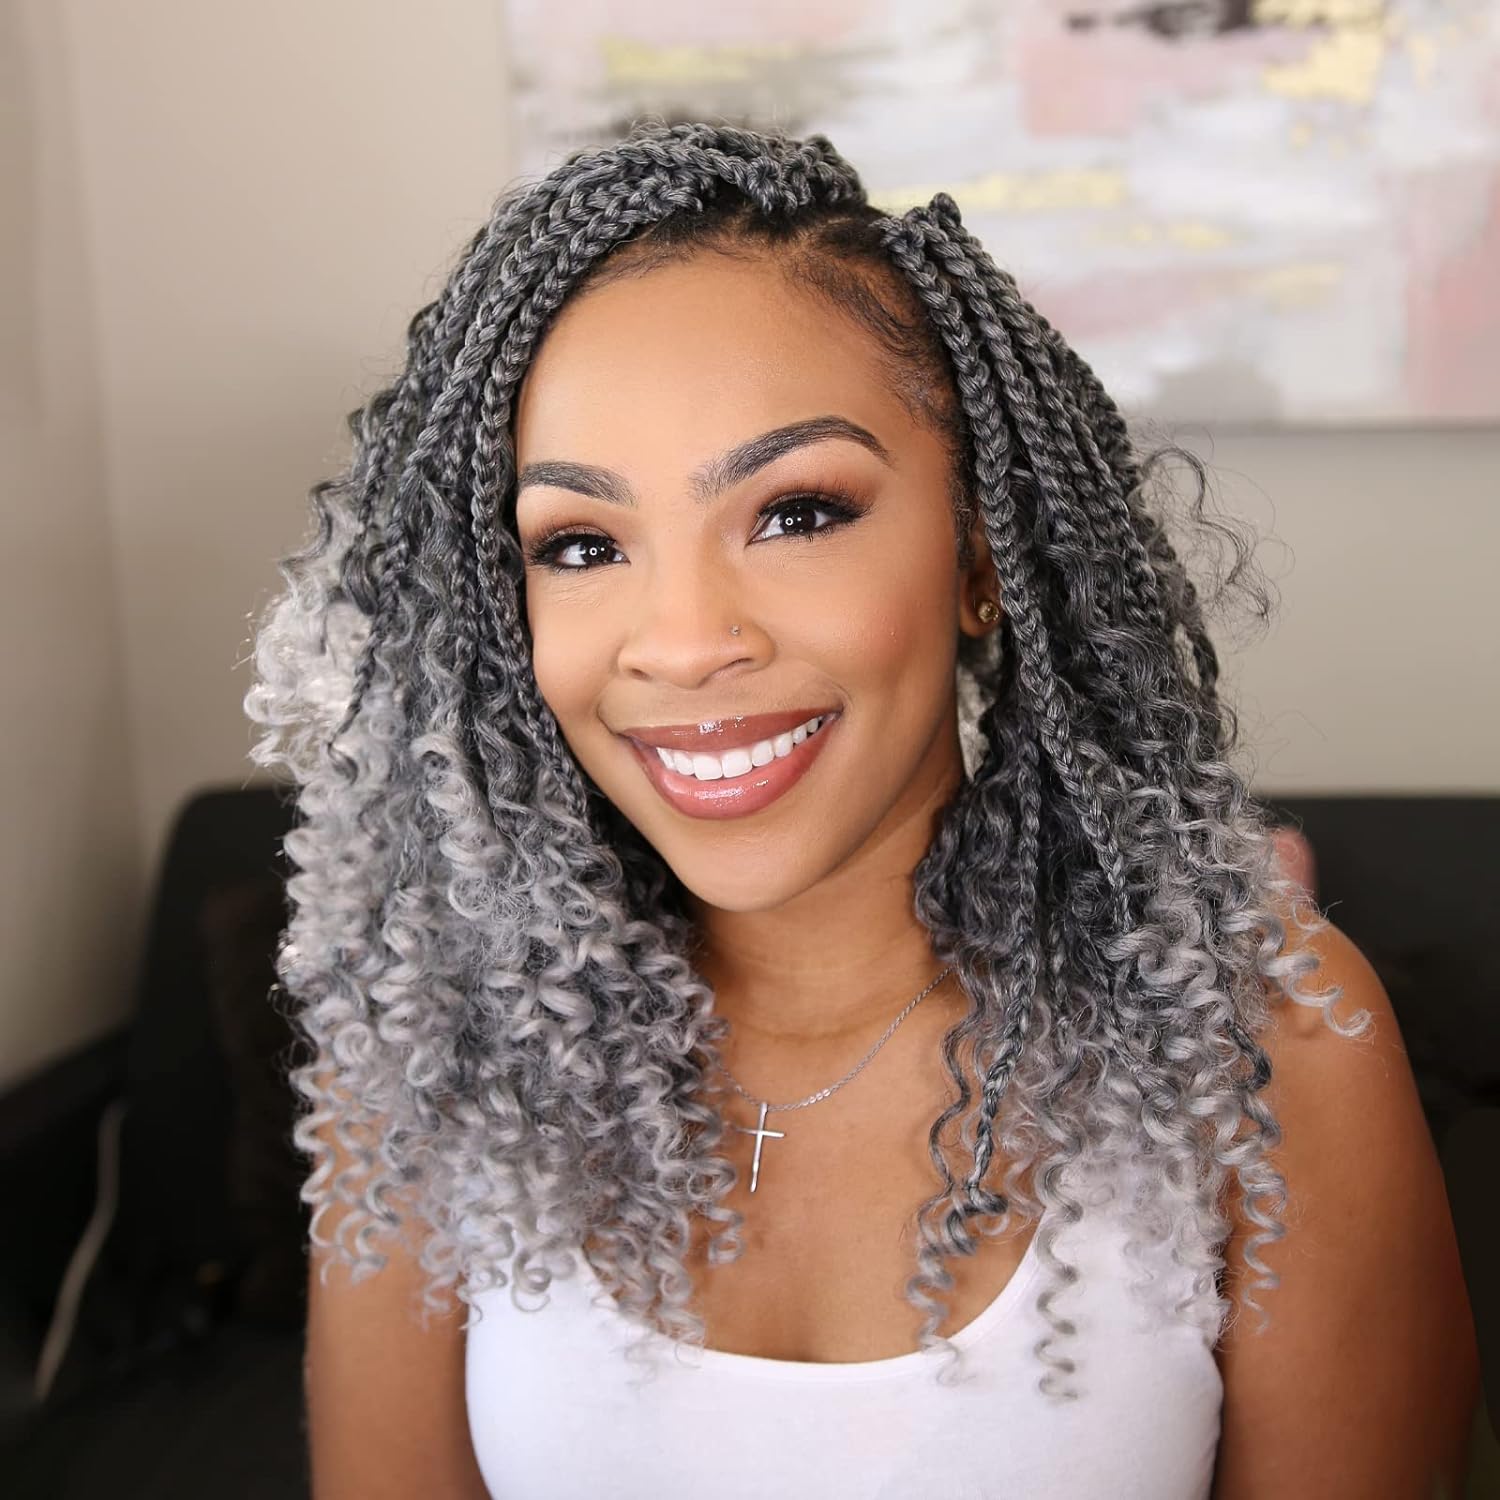 FAST SHIPPING 3-5 DAY GBB | ToyoTress Bohemian Box Braids Crochet Hair - 10 Inch 8 Packs Ombre Brown Blonde Box Braids Crochet Hair Curly End Crochet Braids, Short Pre-looped Synthetic Braidsing Hair Extensions